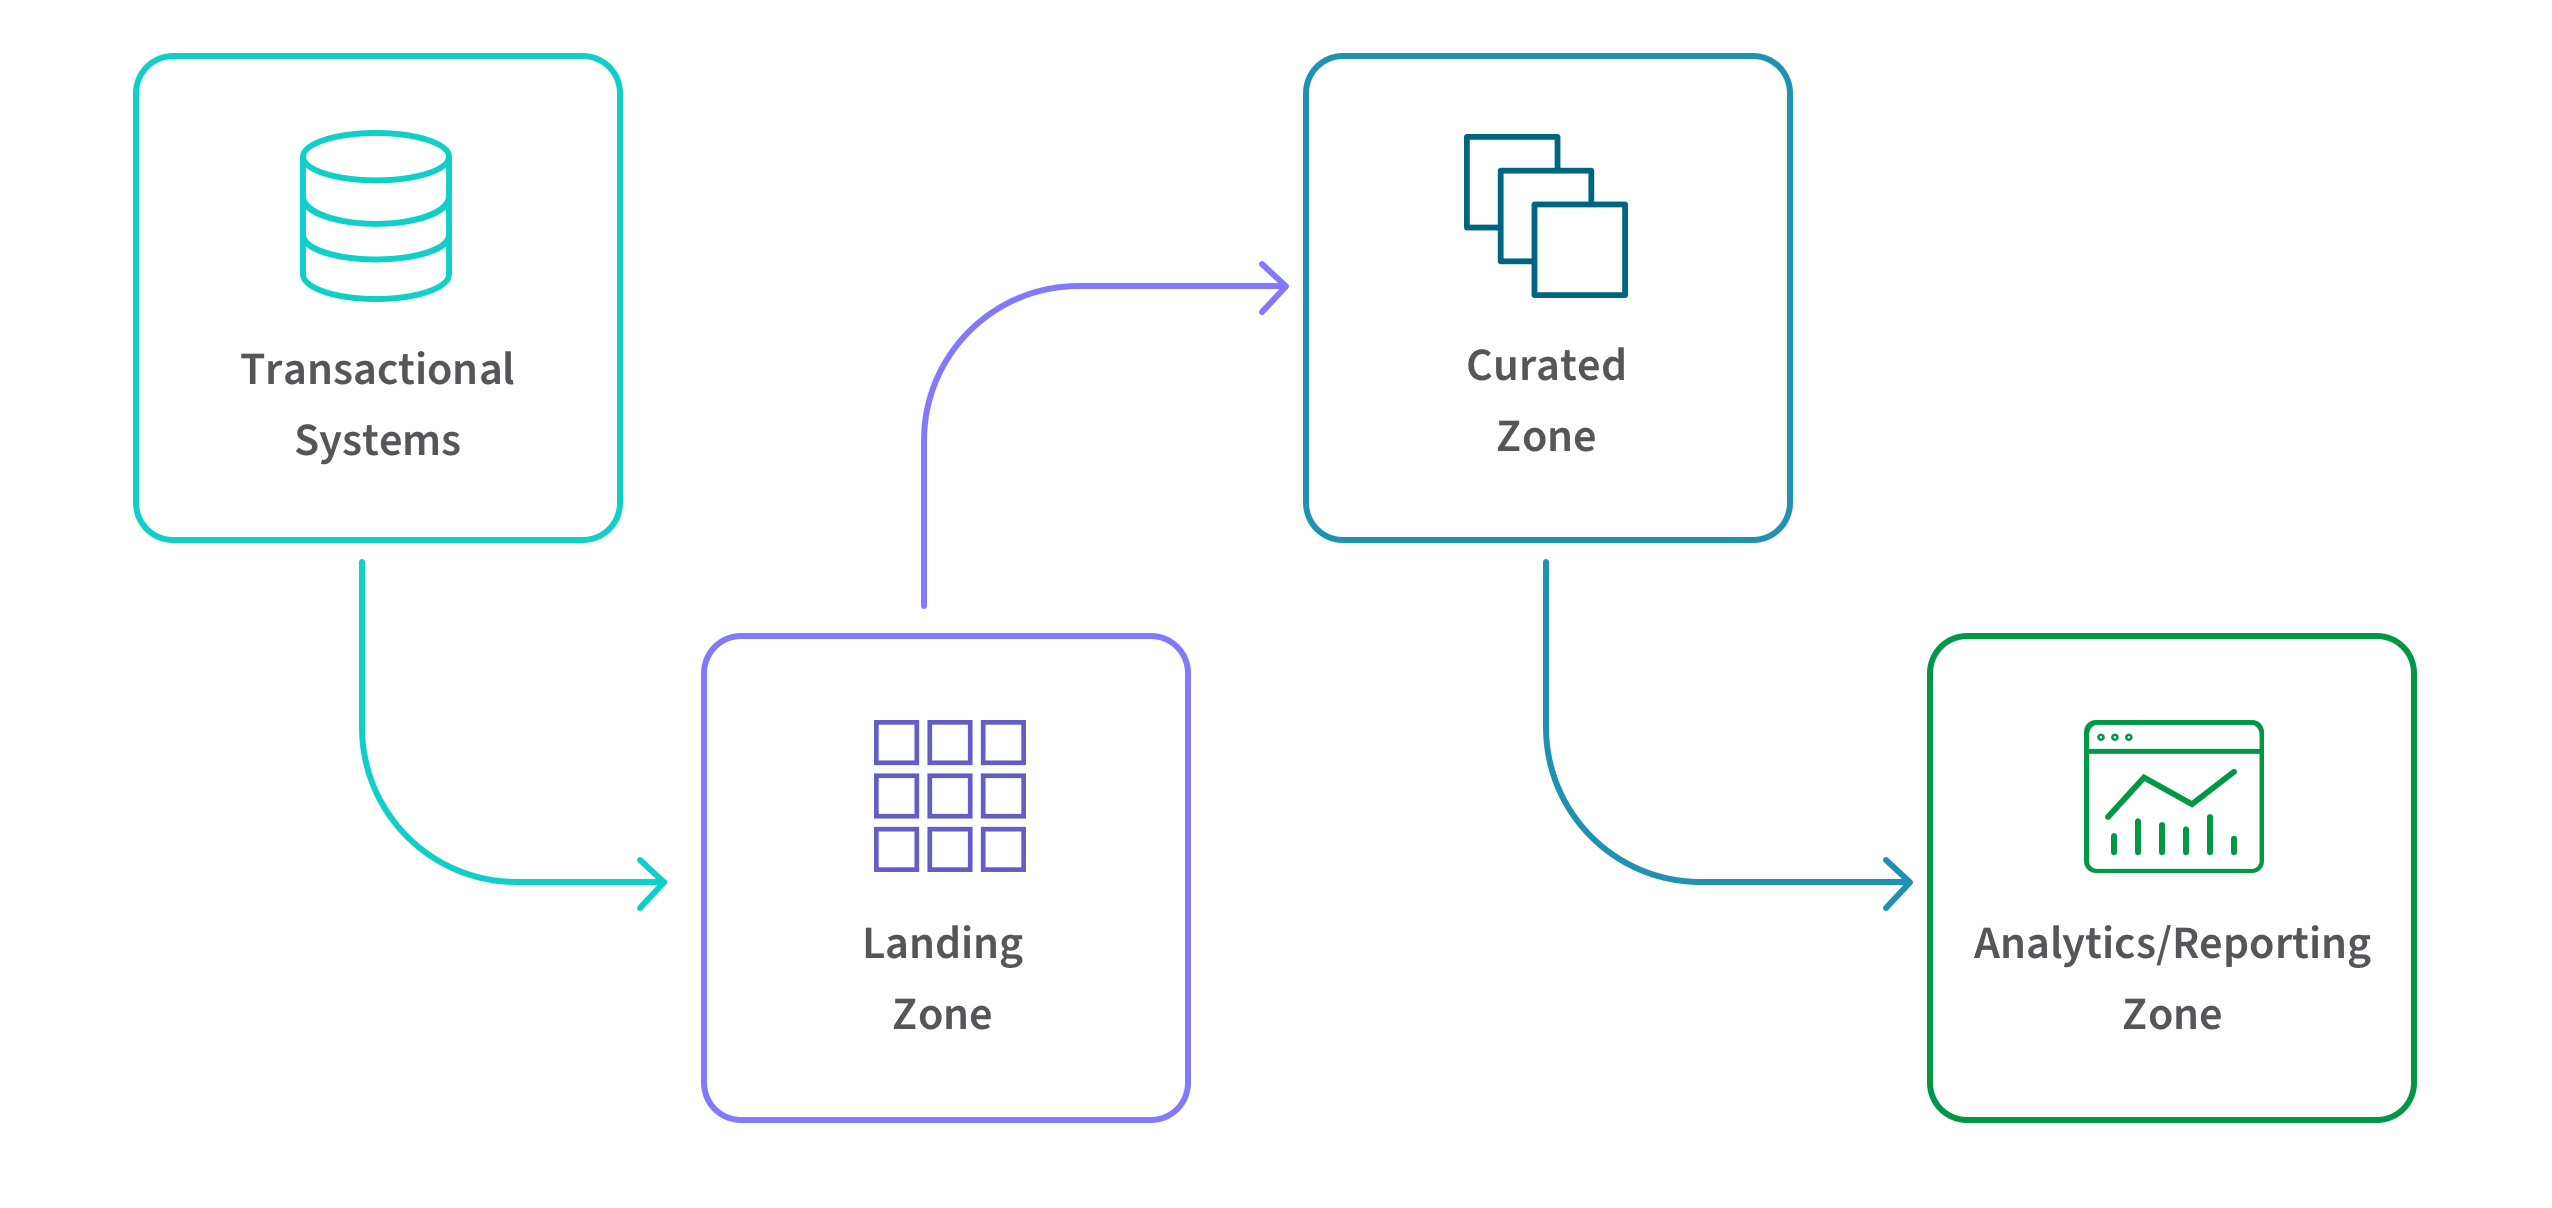 Diagram showing how a Data Warehouse collects information from transactional systems and provides analytics and reporting.